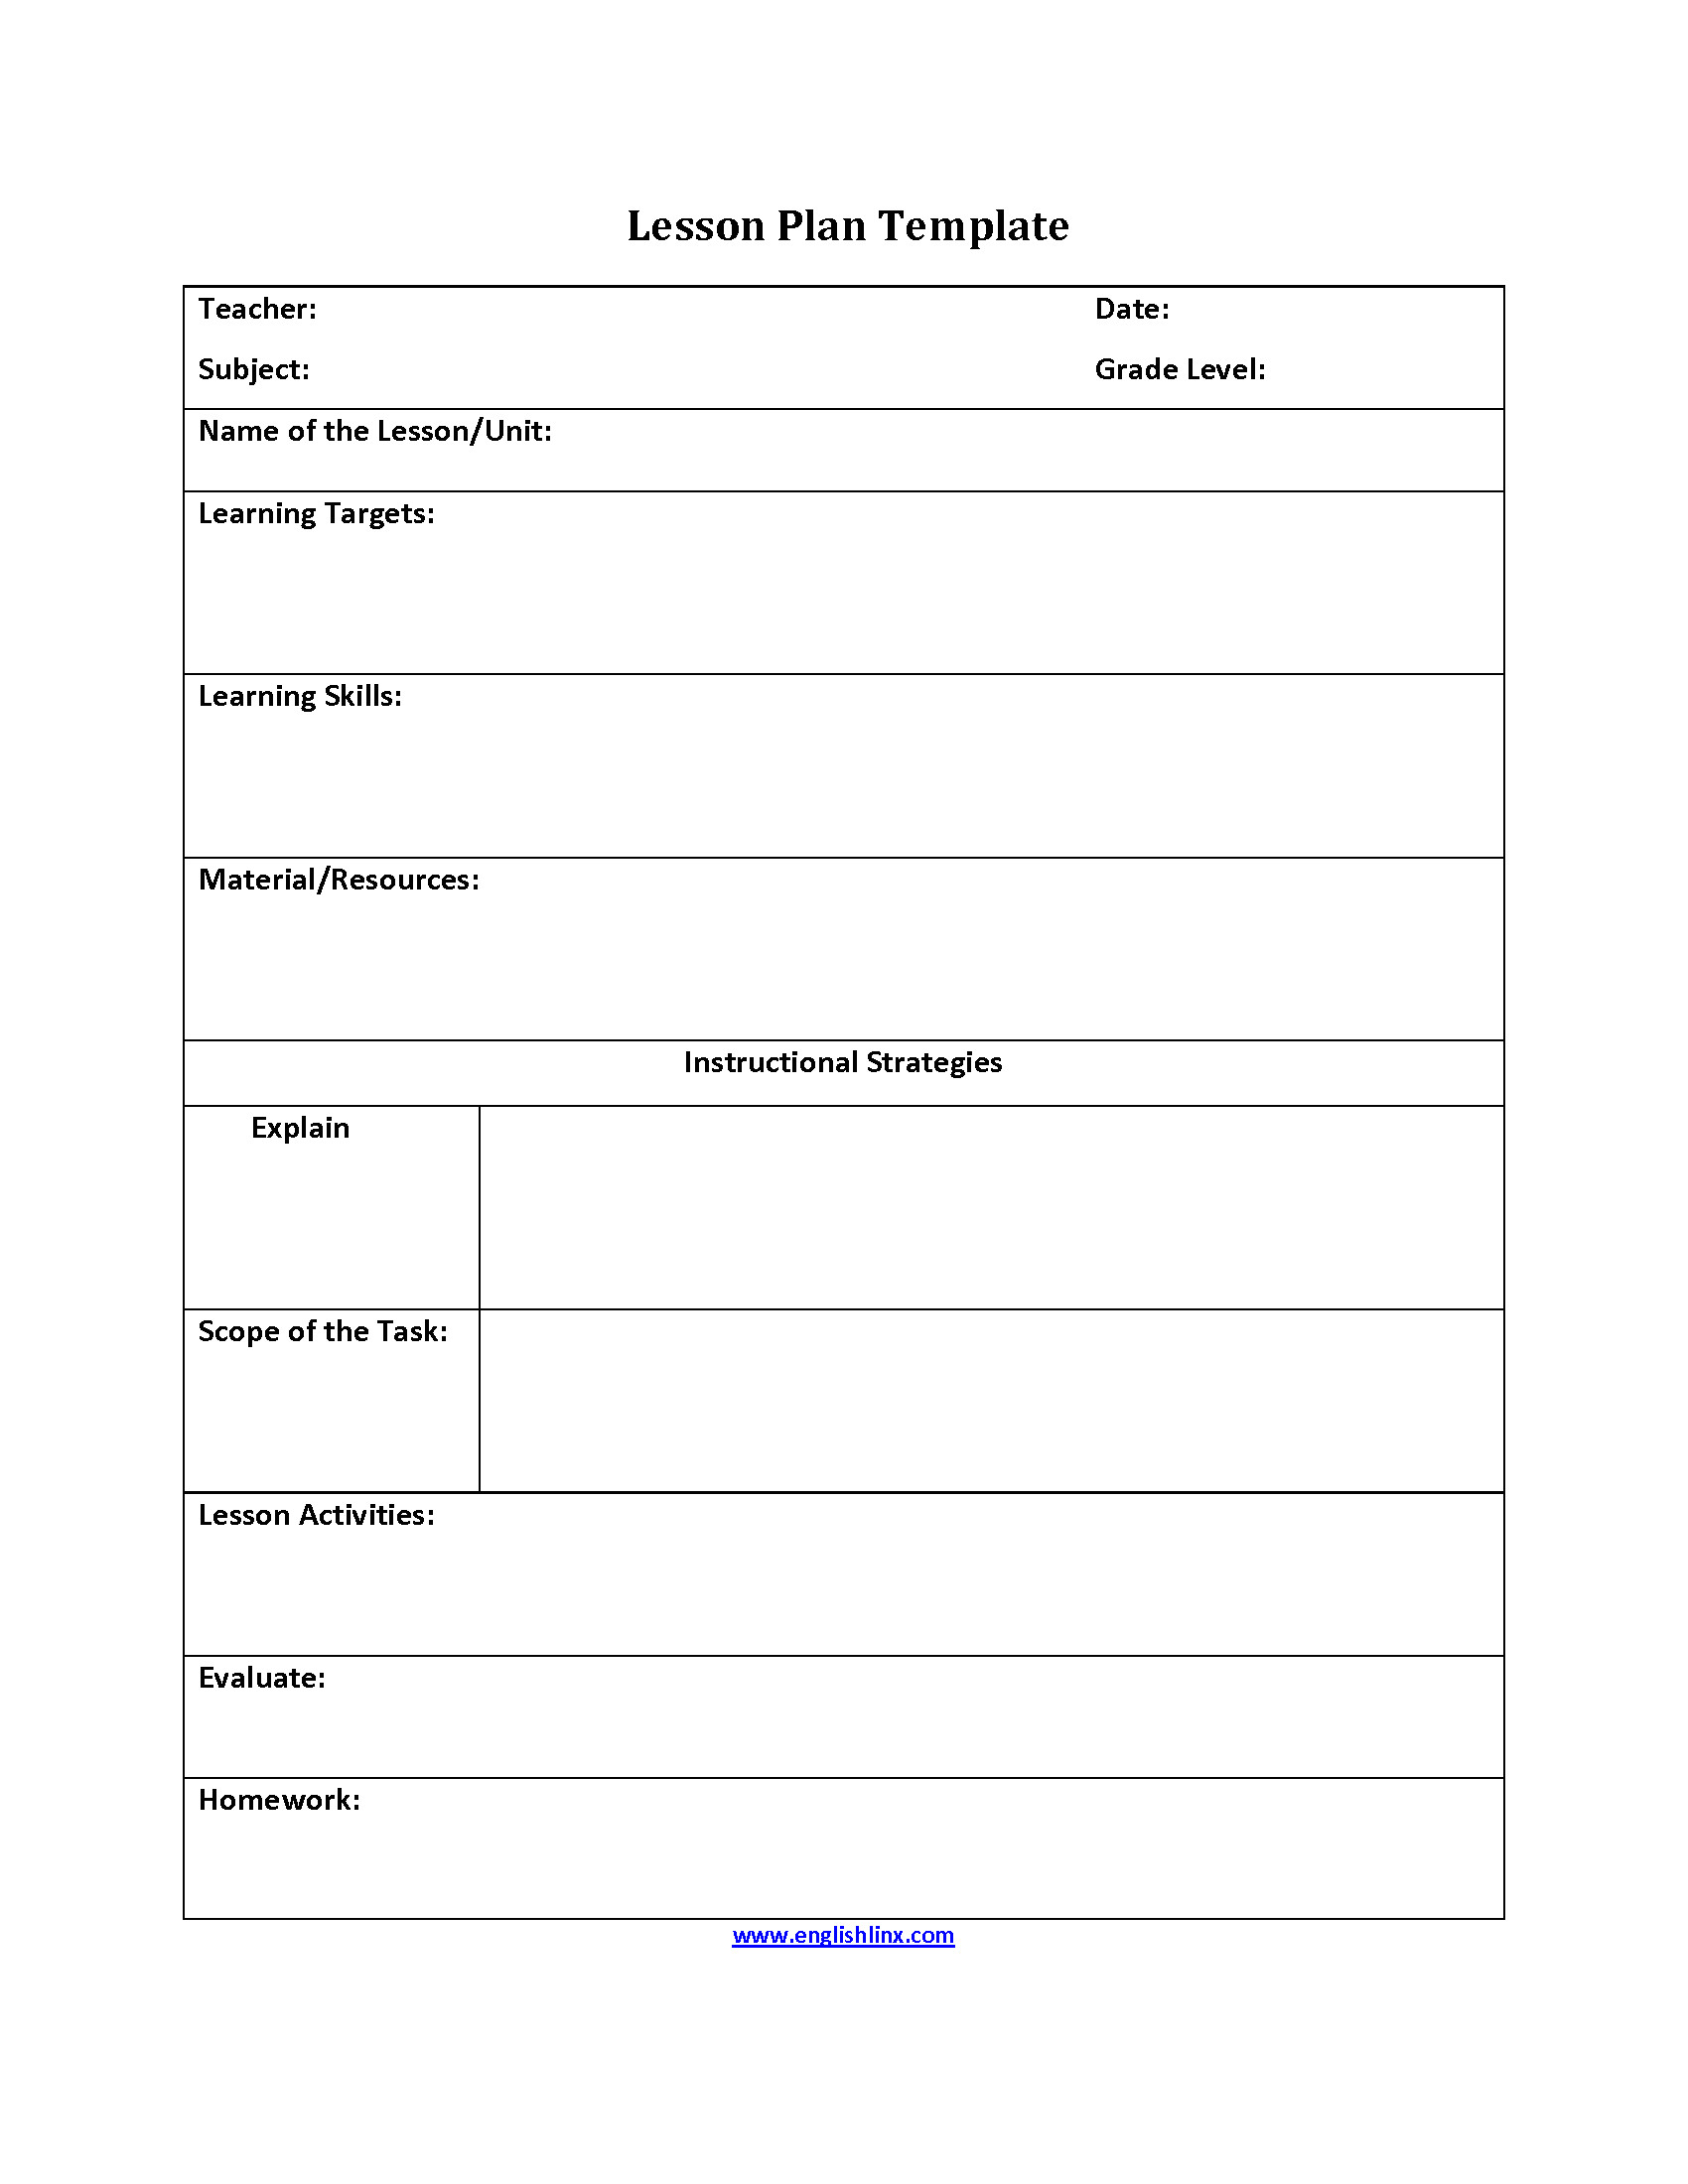 Lessonplan Template Lesson Plan Template